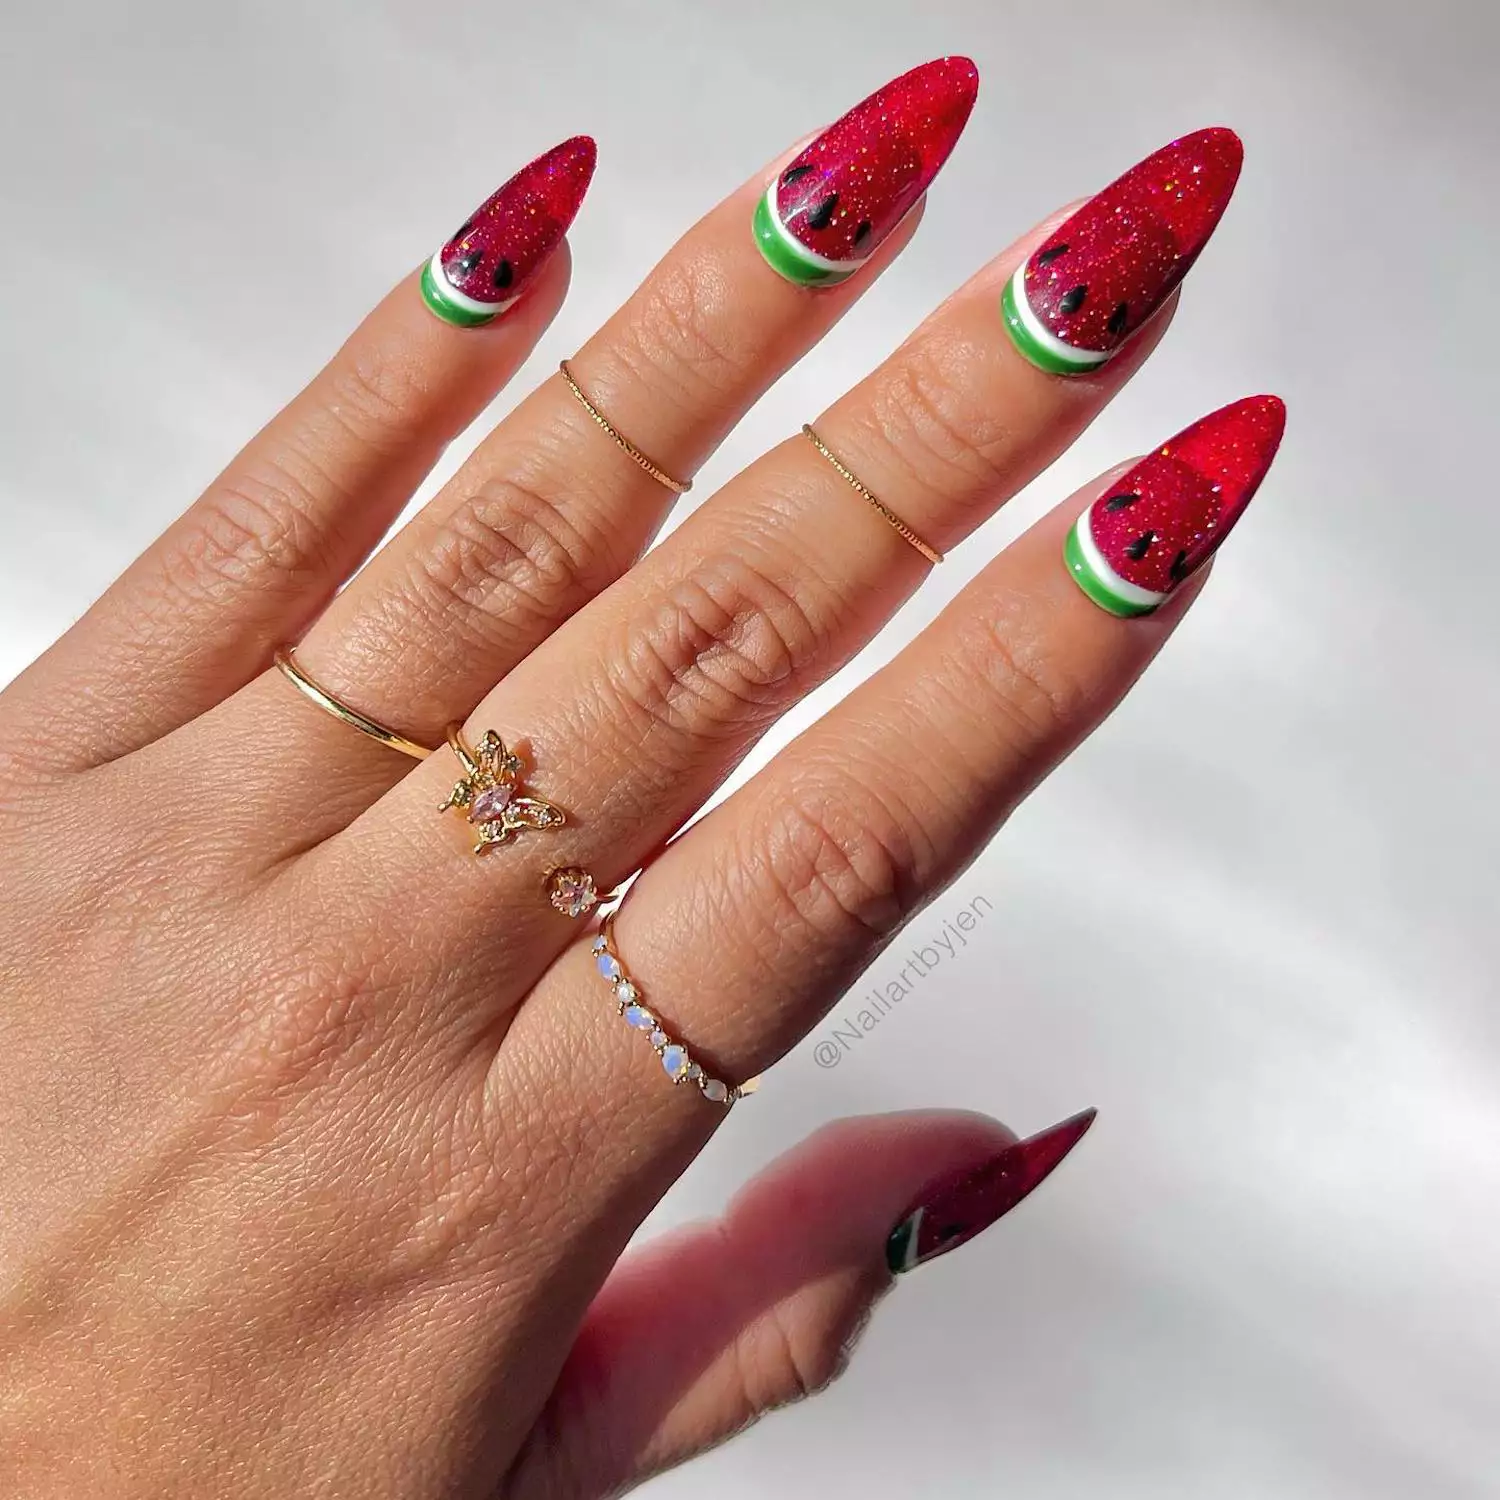 Manicure with red holographic sparkle base, green cuticle watermelon "rind", and black seed design